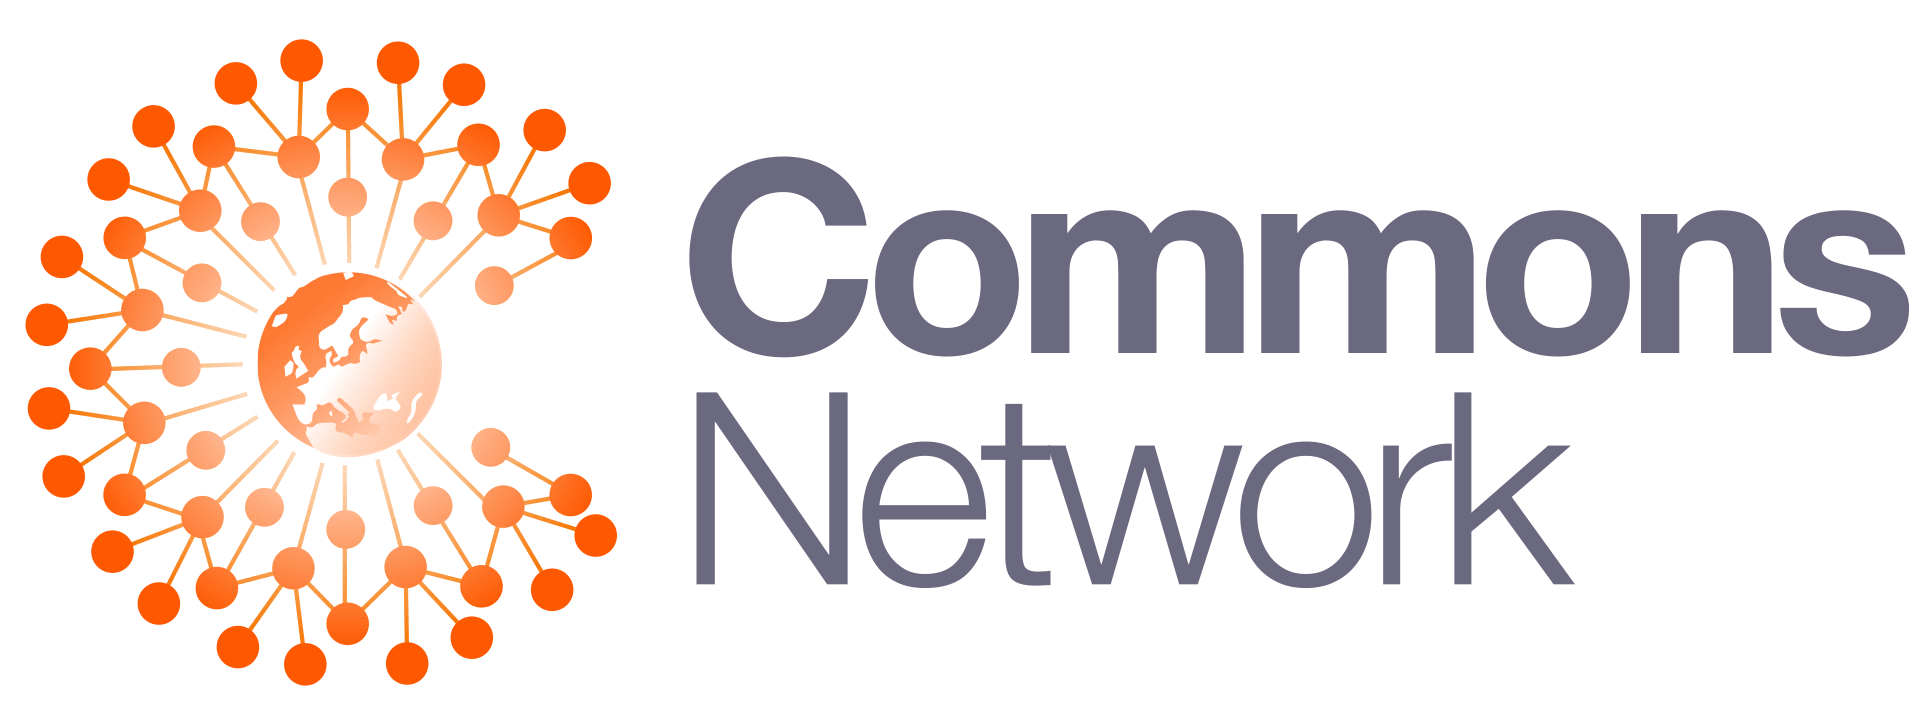 Network Logo - Commons Network Presents: Our New Logo – Commons Network